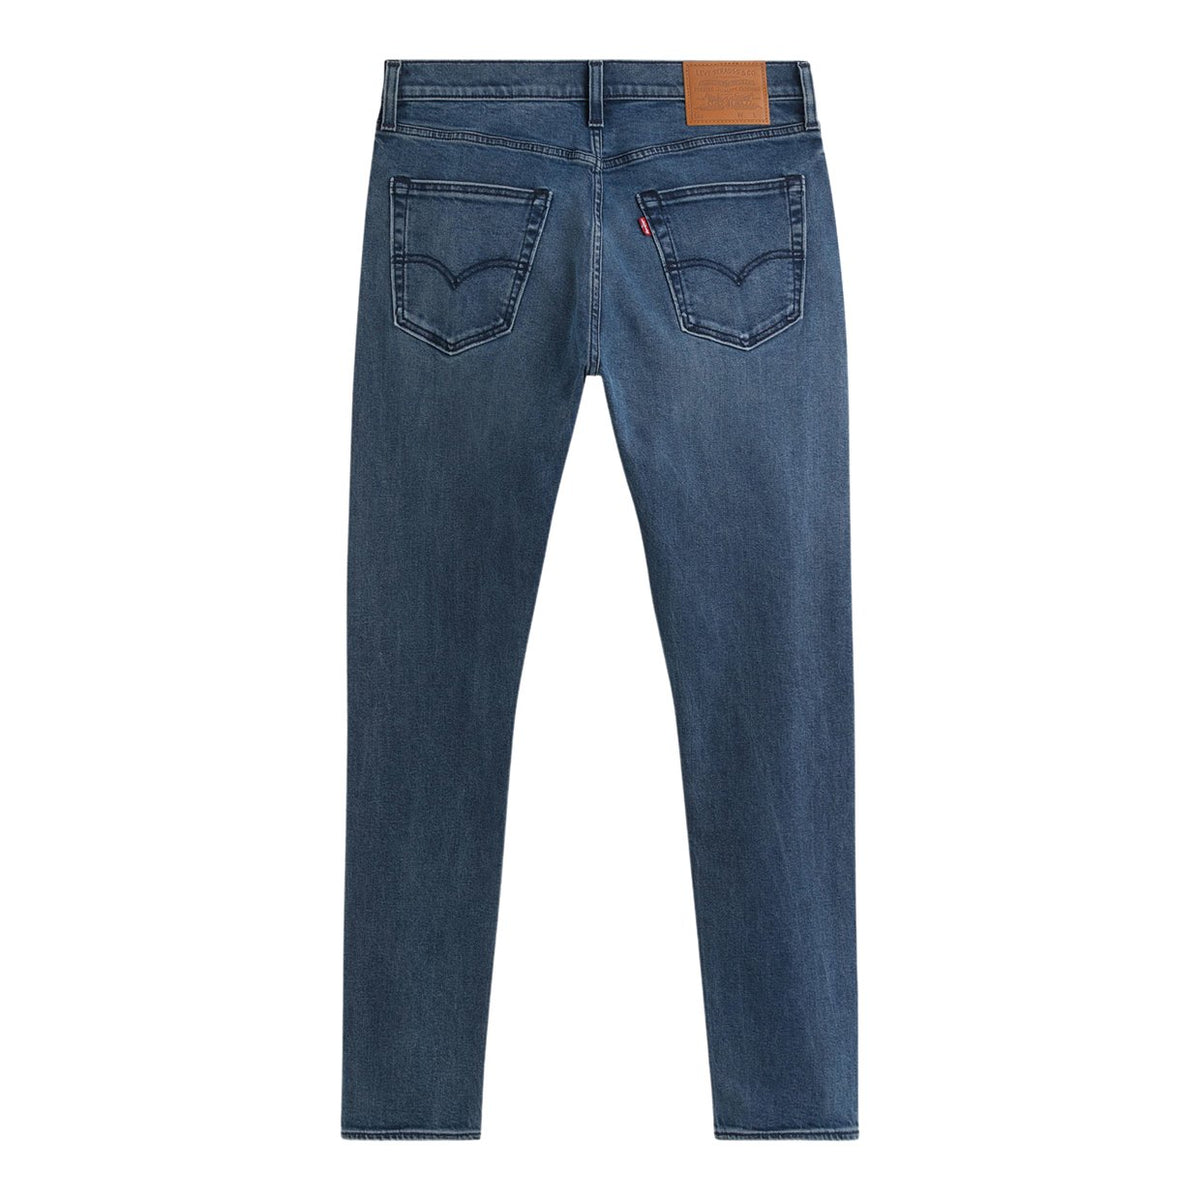 Jeans Levi's 512 Slim Tapered Blue Clean Hands su Brubaker Store